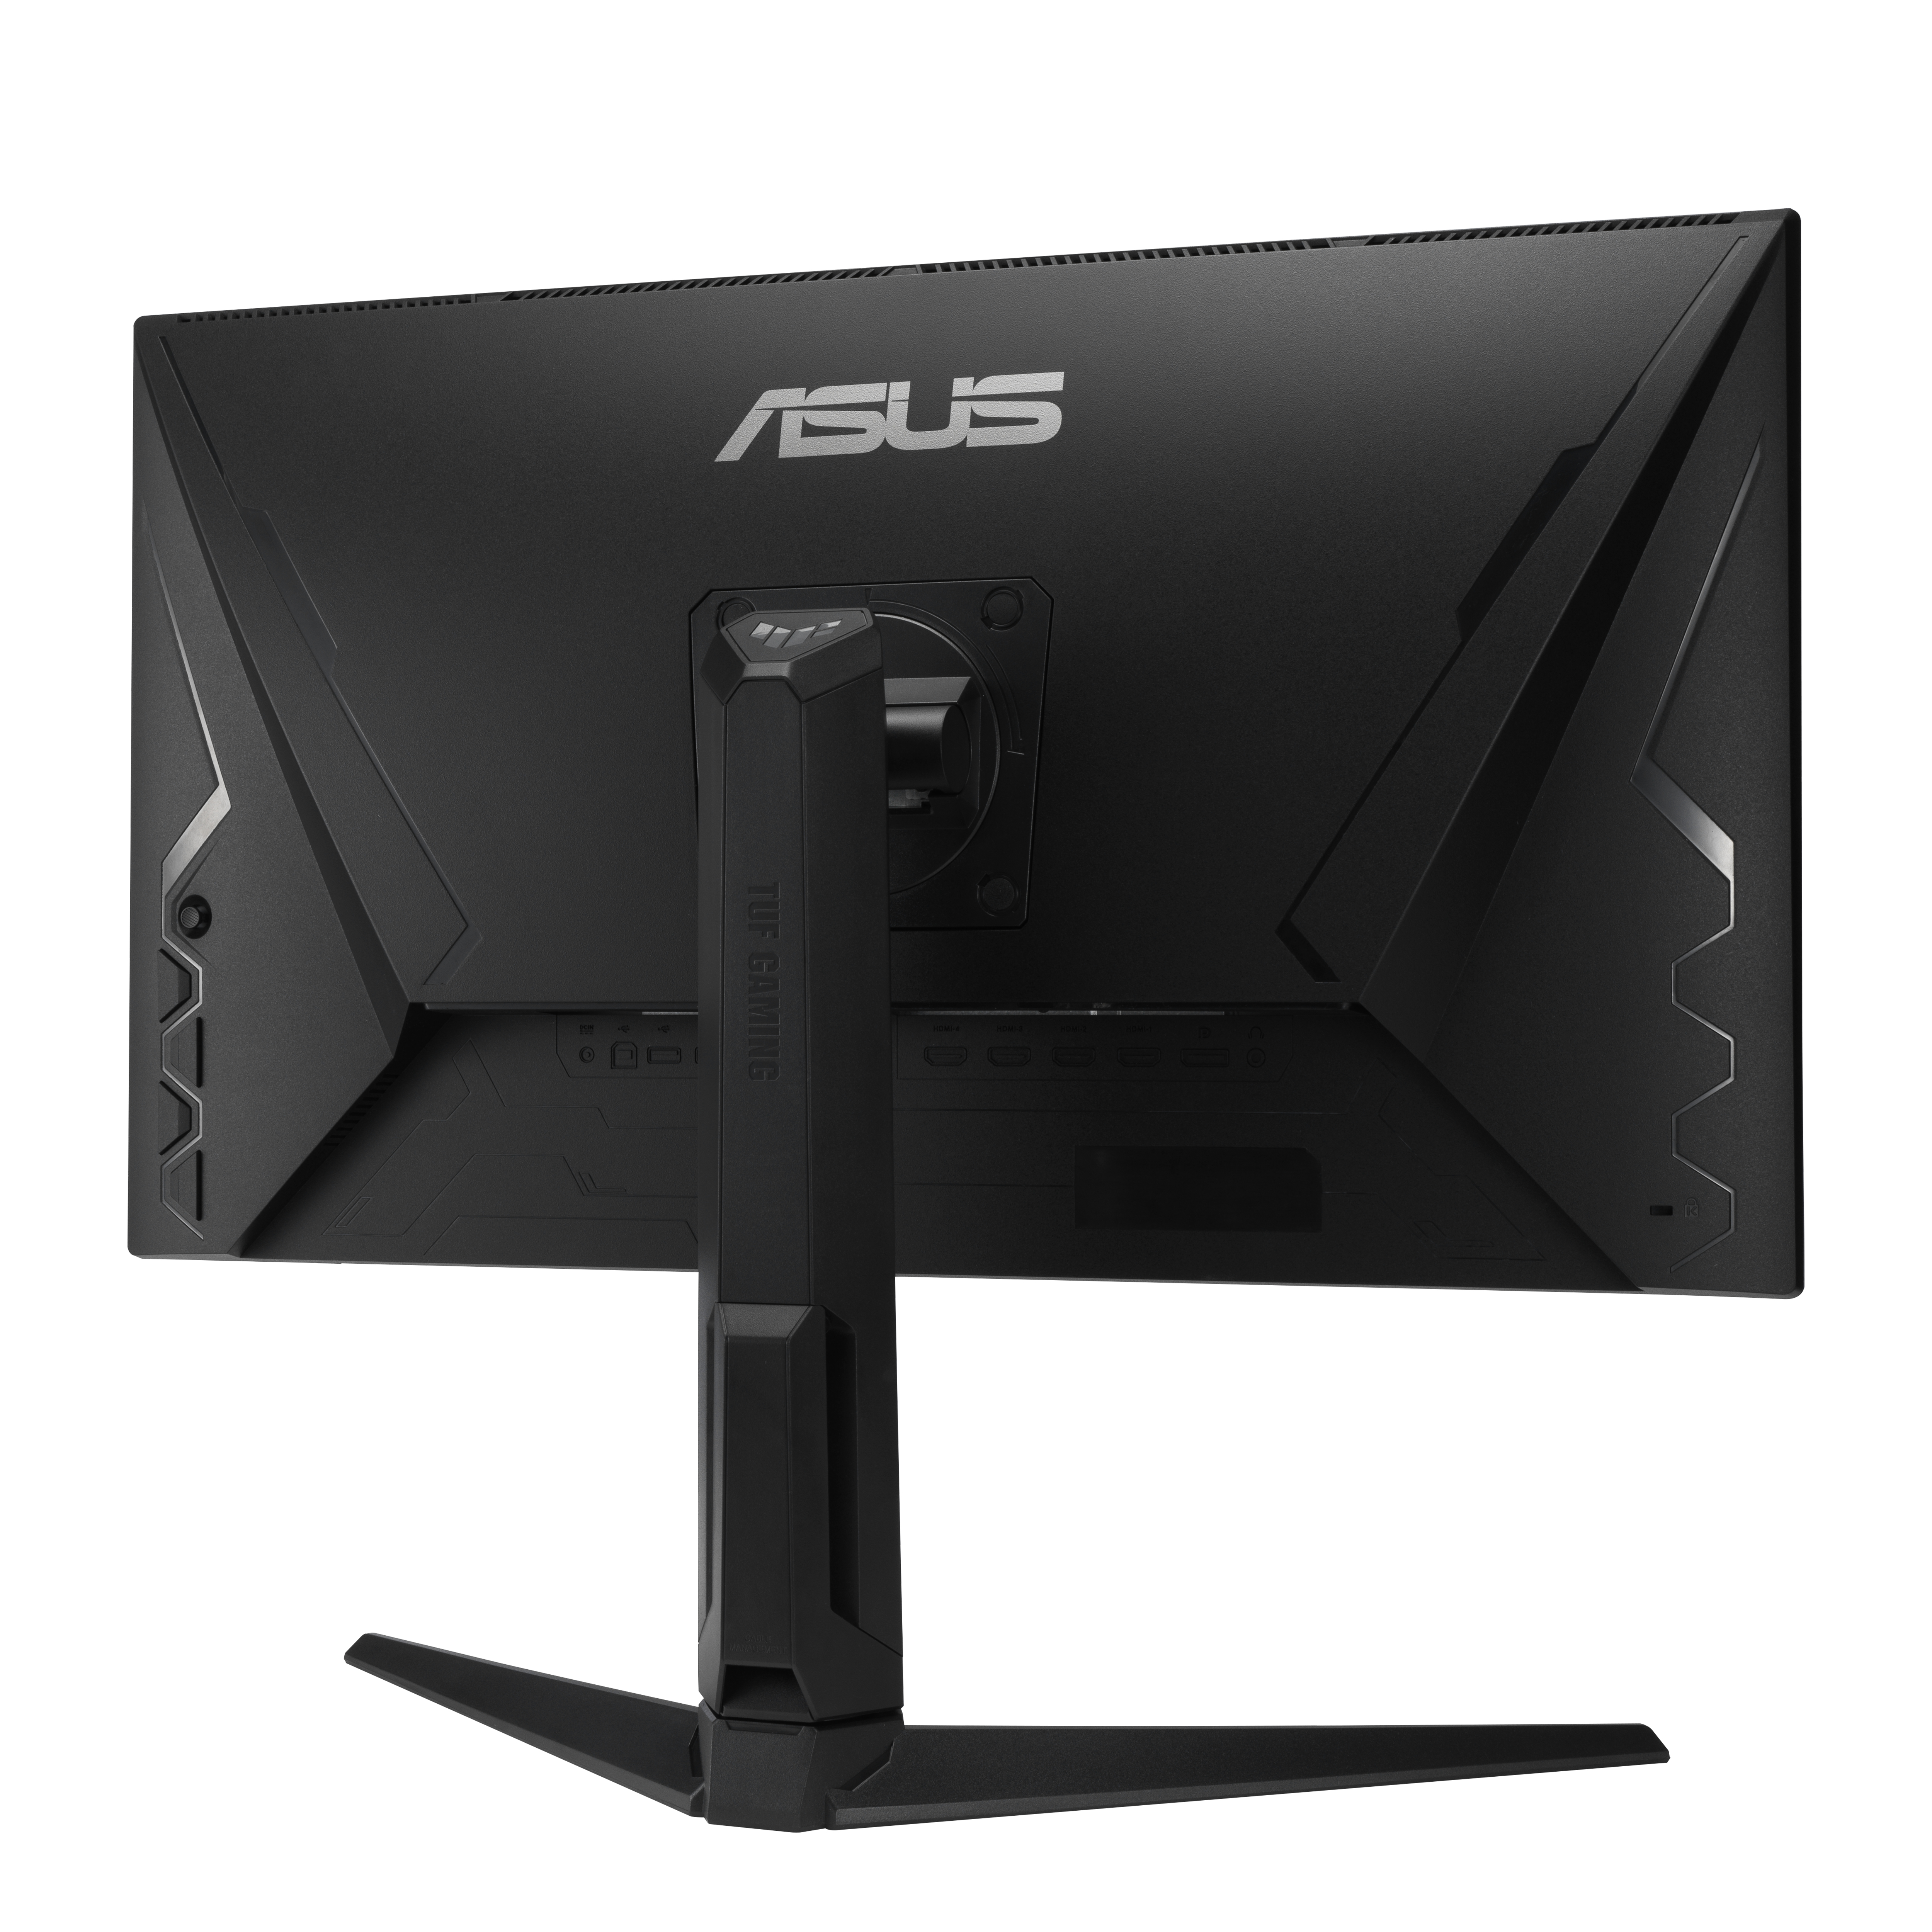 ASUS TUF Gaming VG28UQL1A ms Monitor Zoll Gaming (1 Reaktionszeit, 28 UHD 4K 144 Hz)